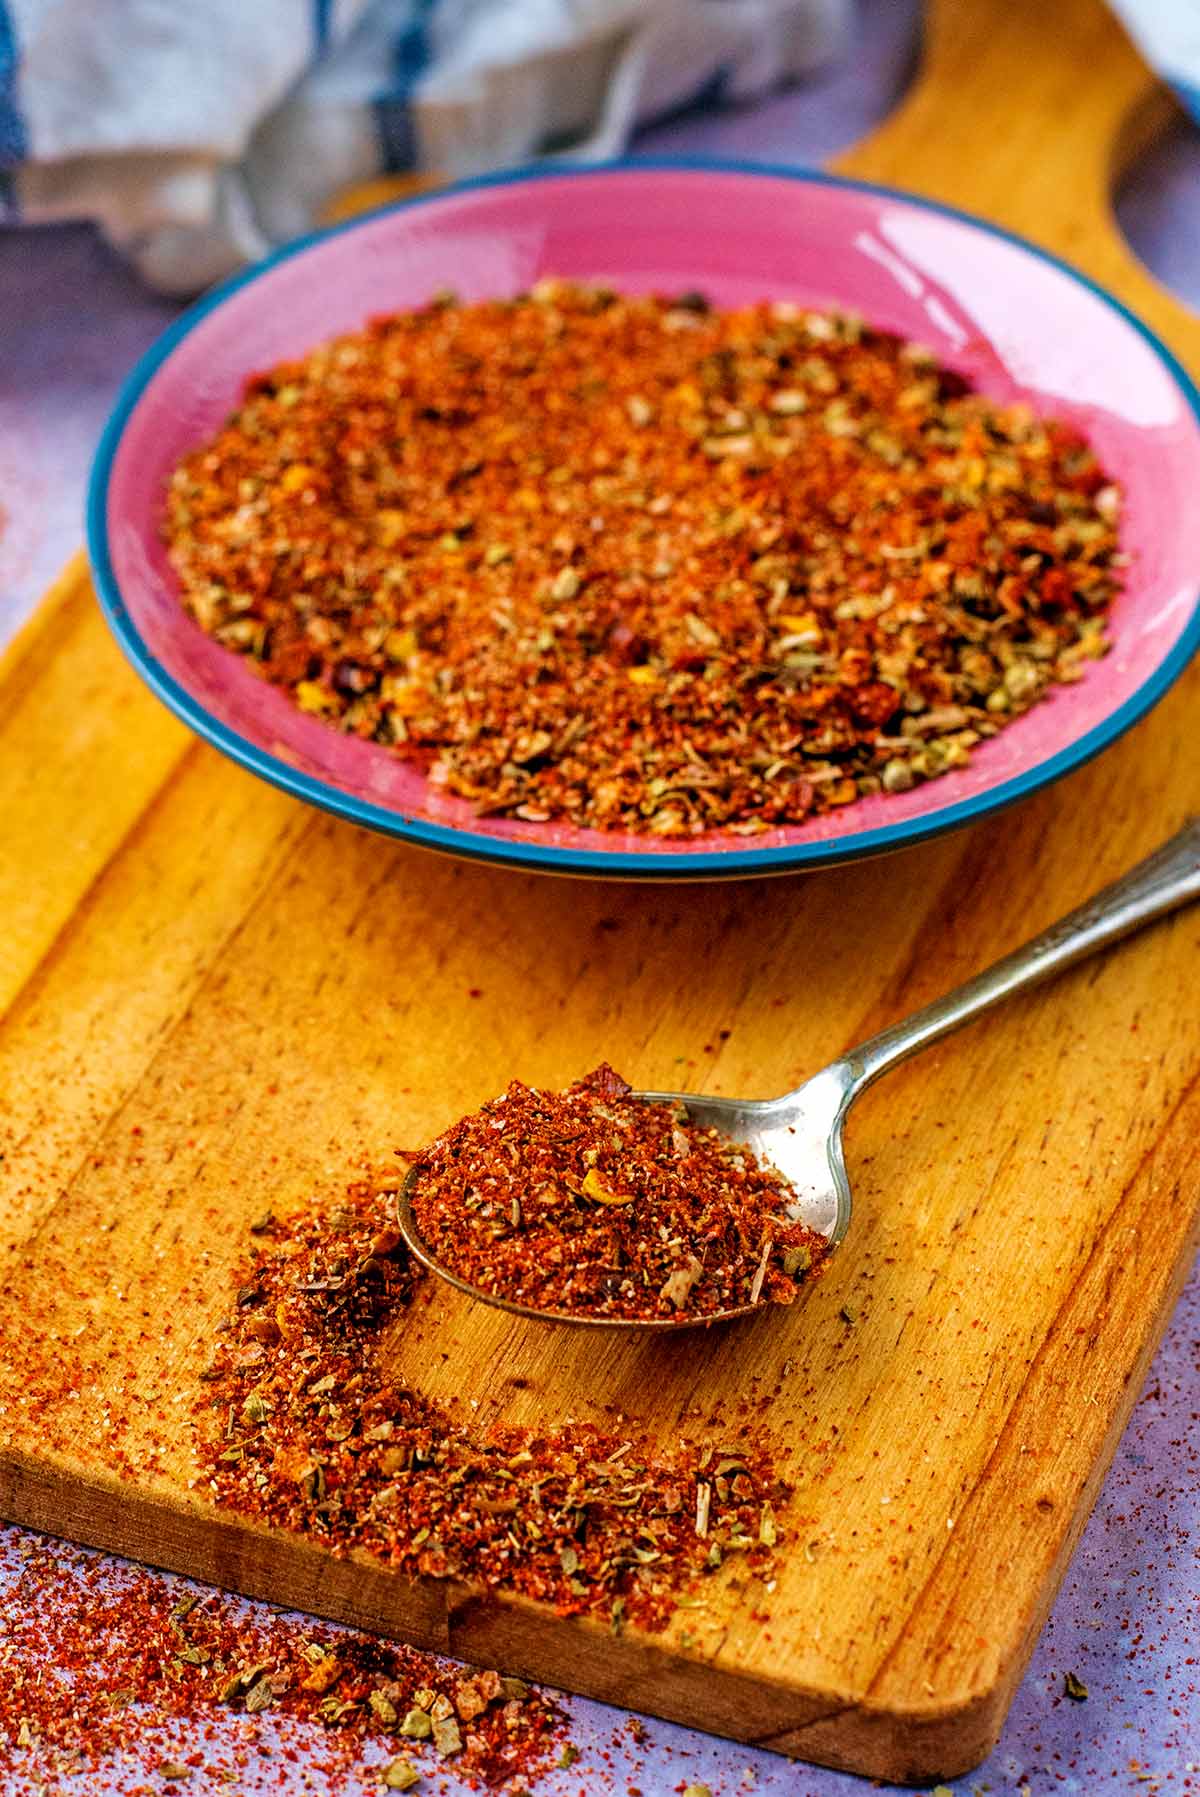 A spoonful of seasoning in front of a dish of the same seasoning.